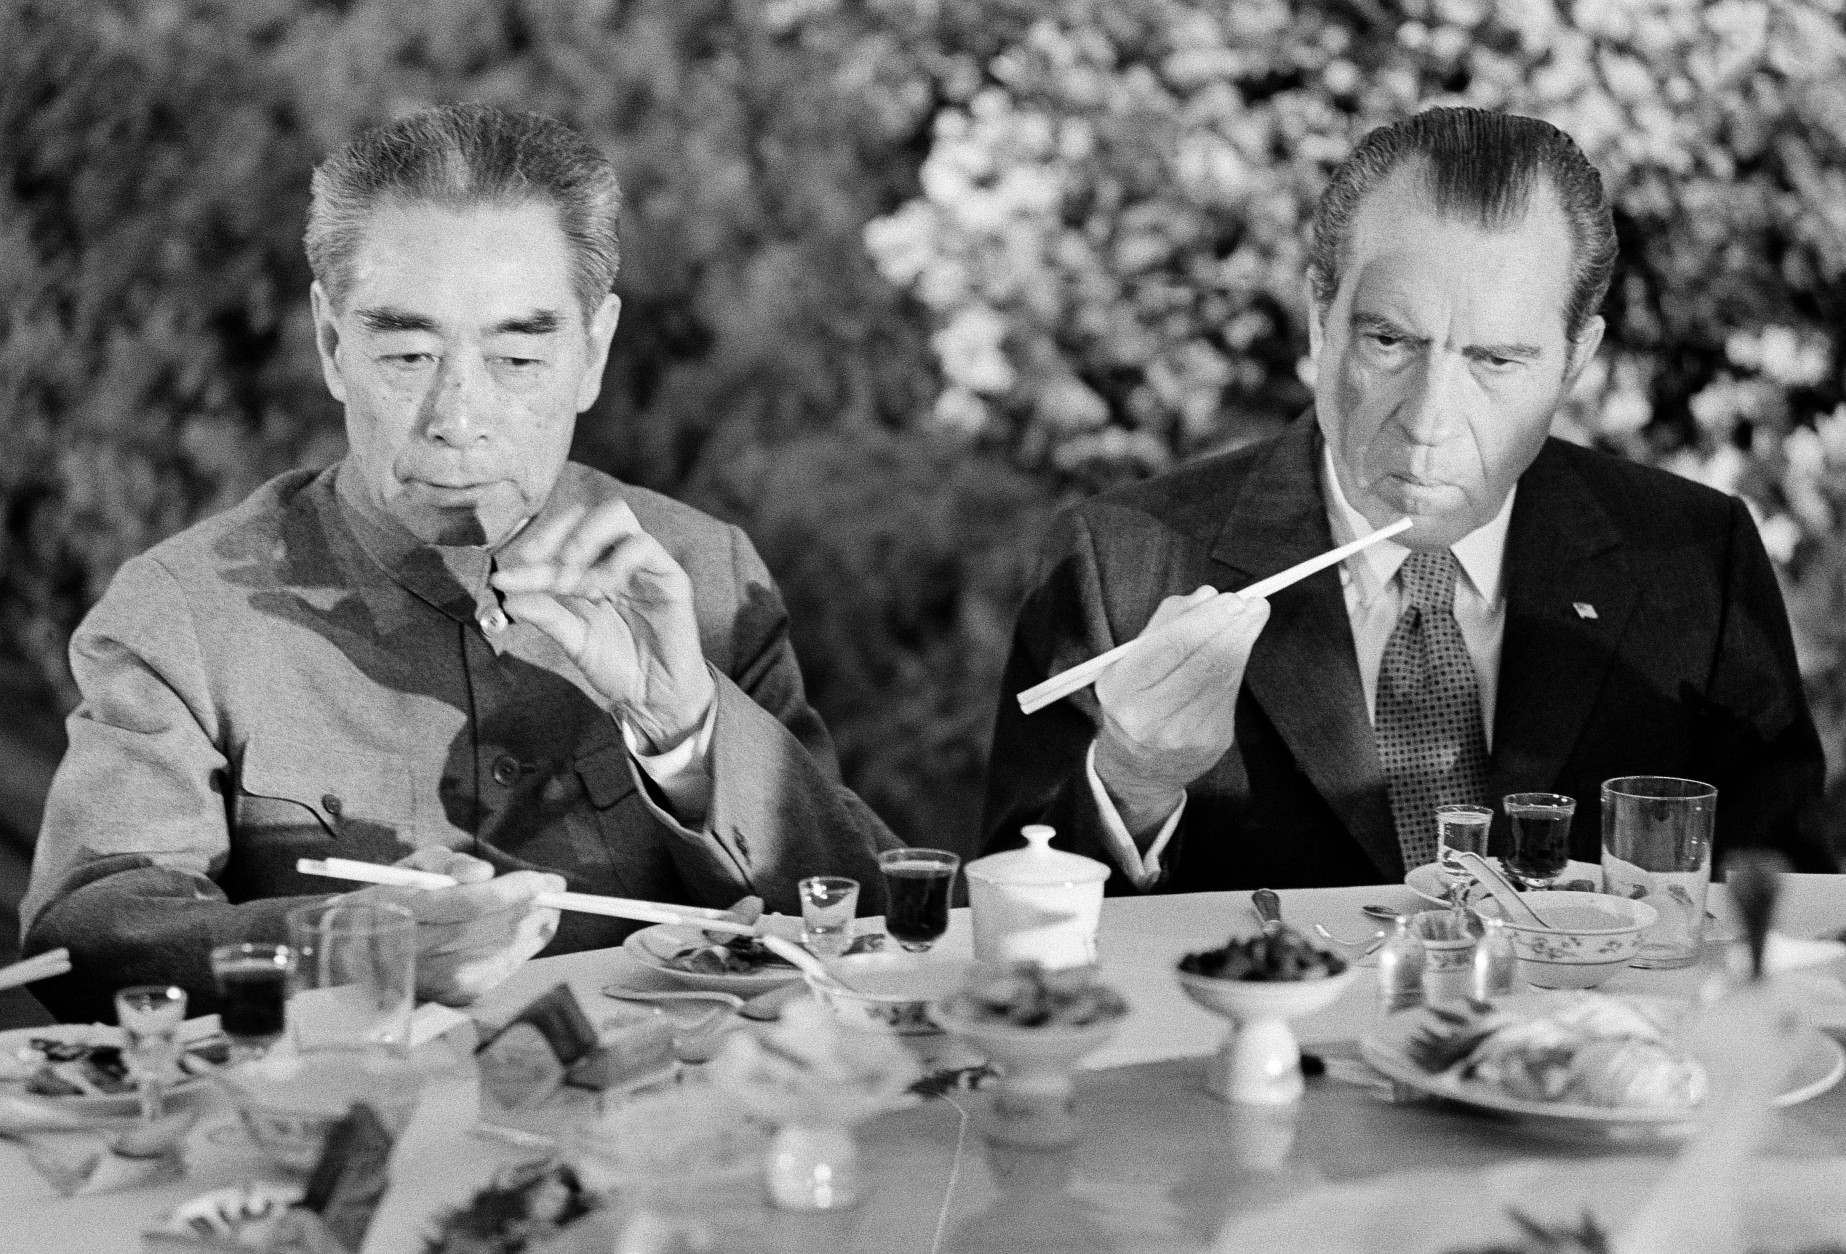 U.S. President Richard Nixon, right, is serious-faced as he eats with chopsticks in Shanghai, China, on Sunday, February 28, 1972.   At left is China's Premier Chou En-lai.     (AP Photo)